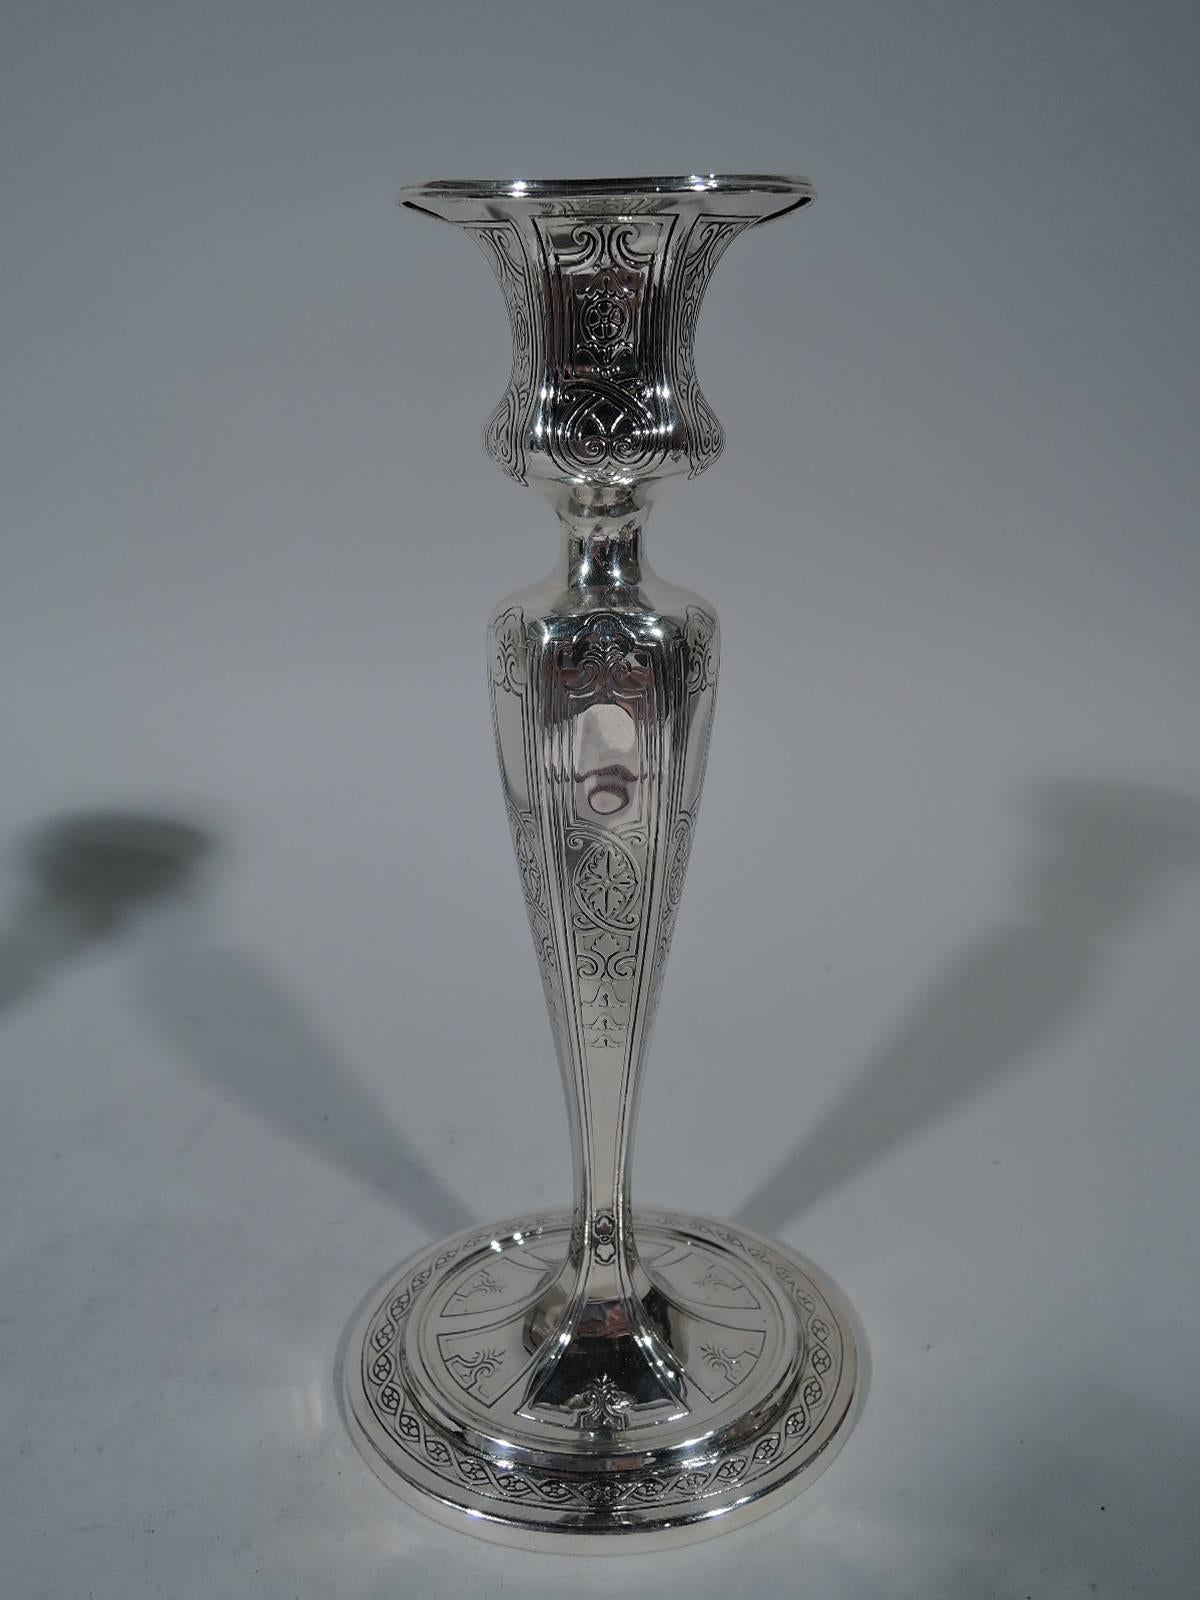 Pair of Edwardian sterling silver candlesticks. Made by Tiffany & Co. in New York, circa 1910. Each: Oval, faceted, and tapering shaft, stepped oval foot, and faceted and urn socket with plain oval rim. Acid-etched and stylized ornament. Hallmark